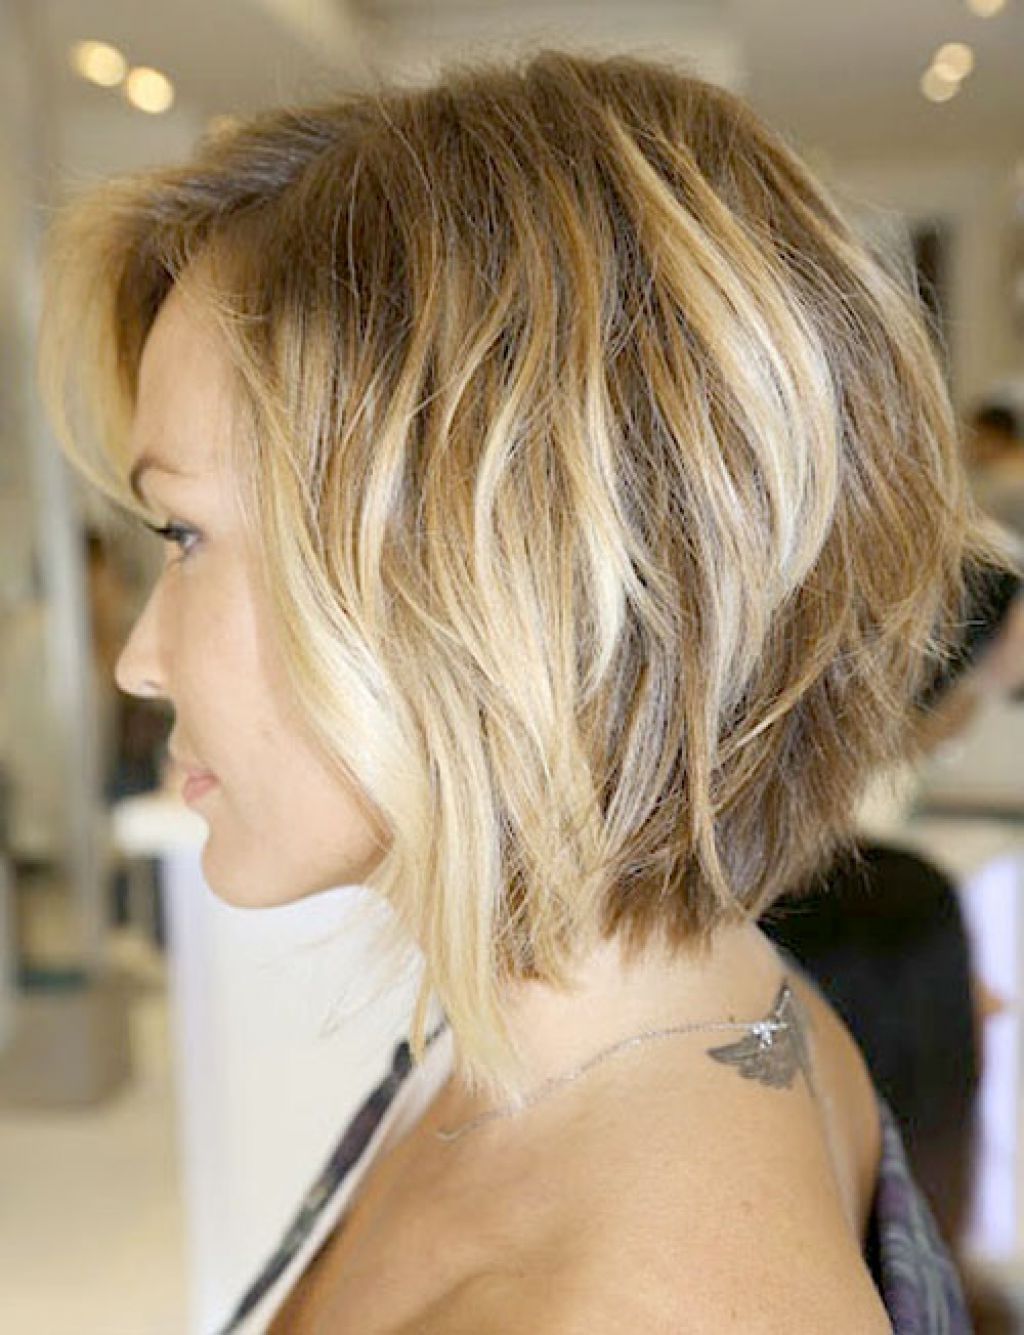 Short Inverted Bob Hairstyles For Wavy Hair – Popular Long With Regard To Favorite Shaggy Wavy Hairstyles (View 15 of 15)